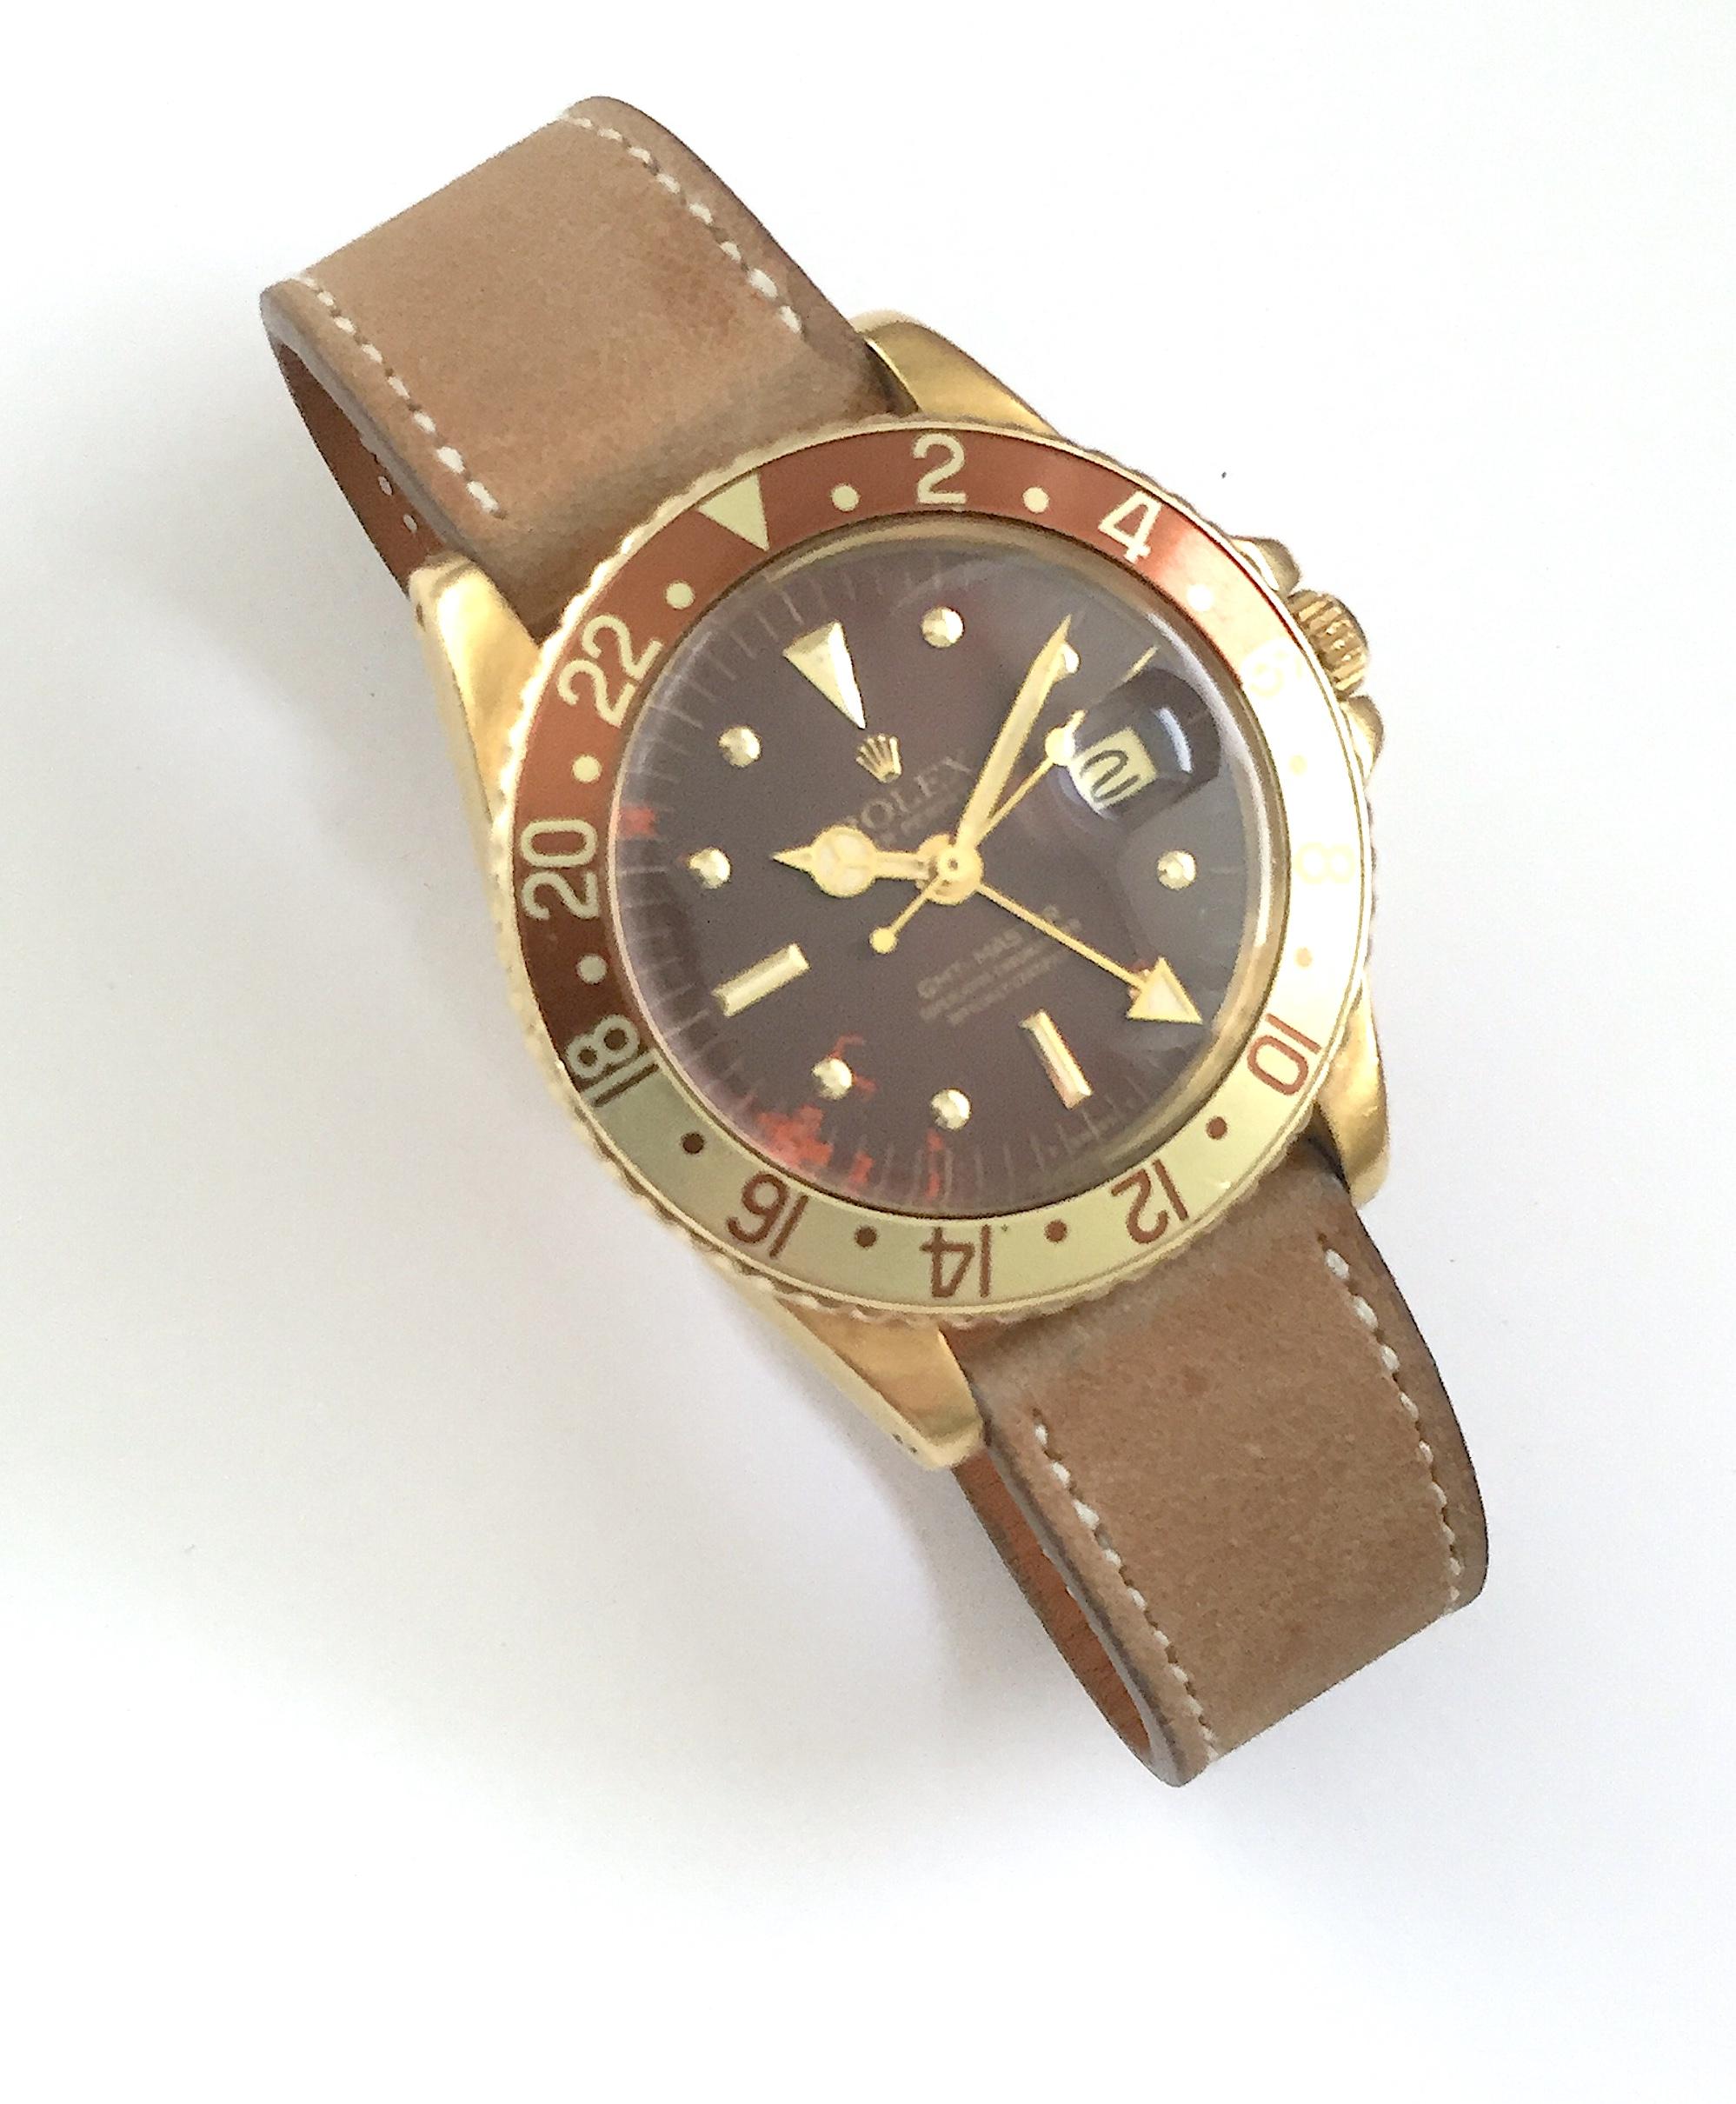 Rolex 18K Yellow Gold Oyster Perpetual GMT Master Watch
Reference 1675 with 18K Yellow Gold Case
Bi-Color 'Root-Beer' Rotating Bezel
Featured GMT Hand for Dual Time Zone Functionality
Brown Gloss Nipple Dial with Natural Tropical Fading and Color